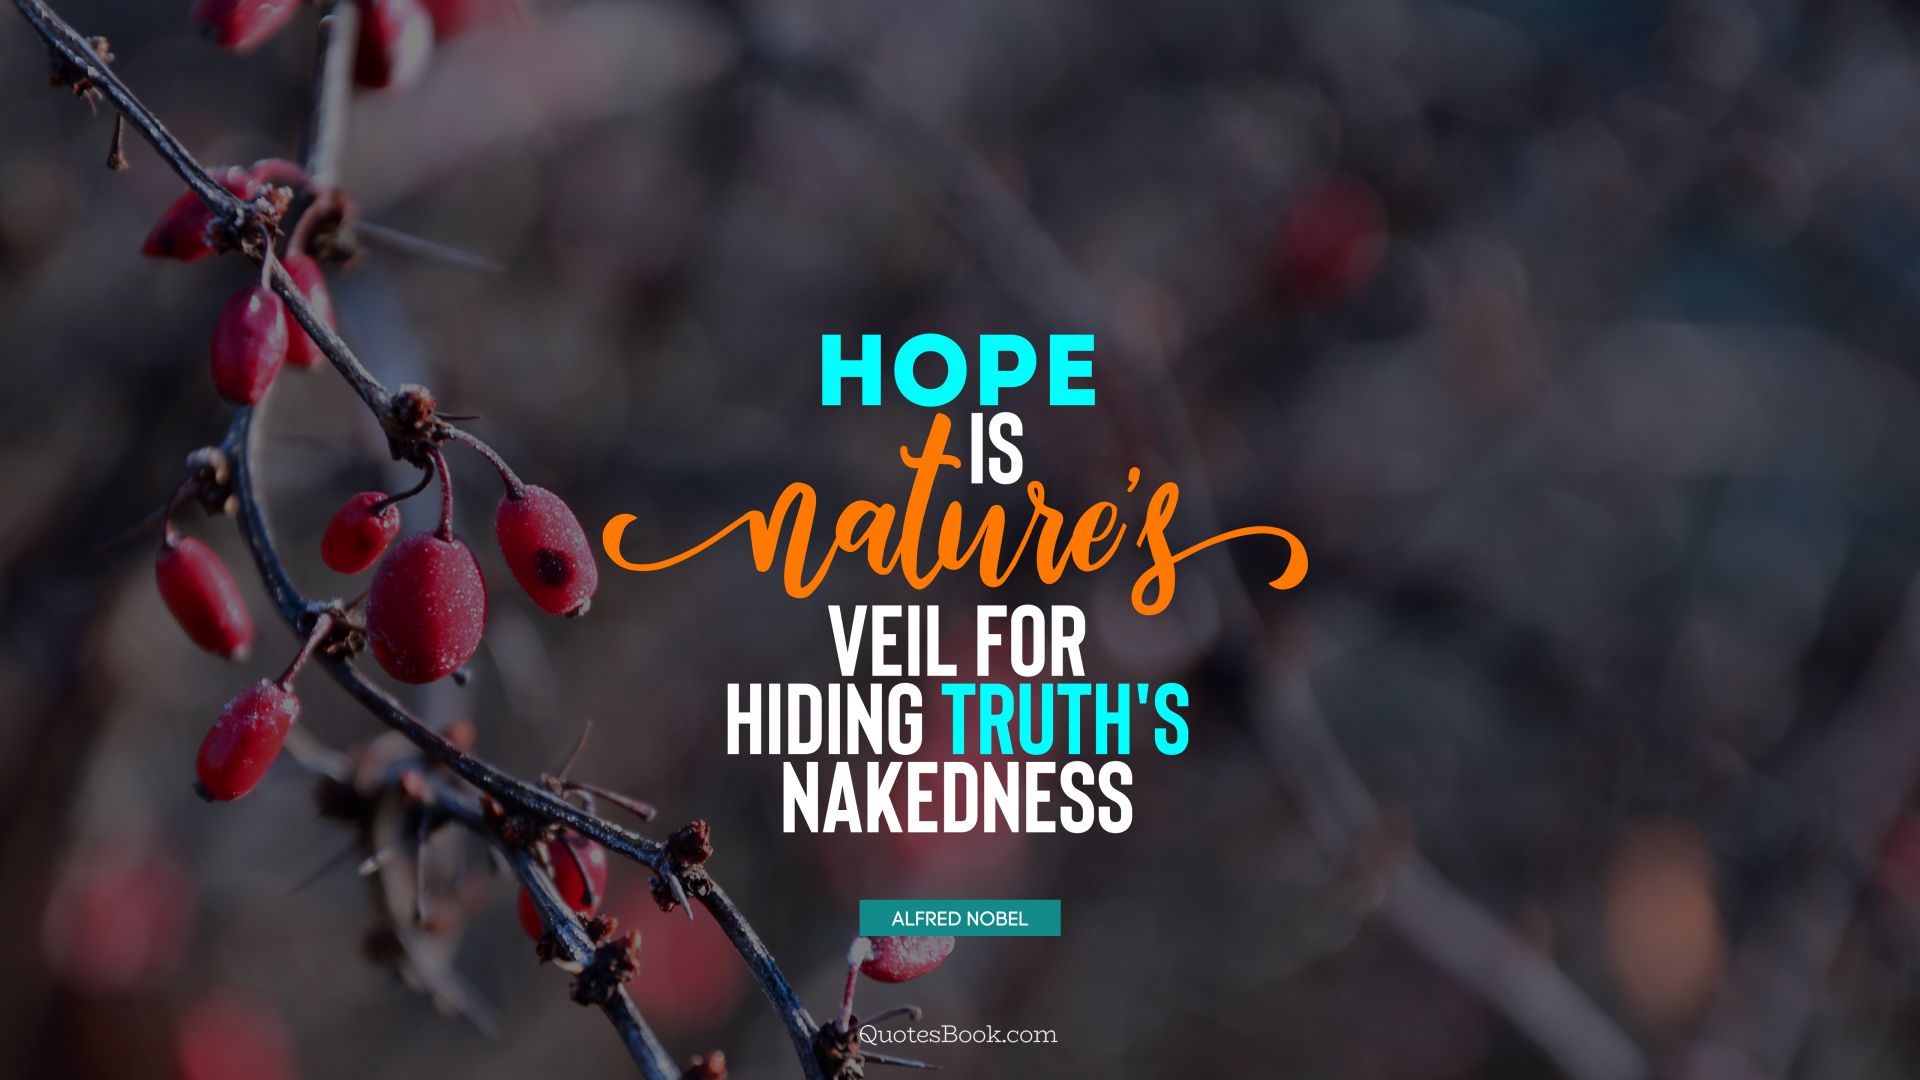 Hope is nature's veil for hiding truth's nakedness. - Quote by Alfred Nobel